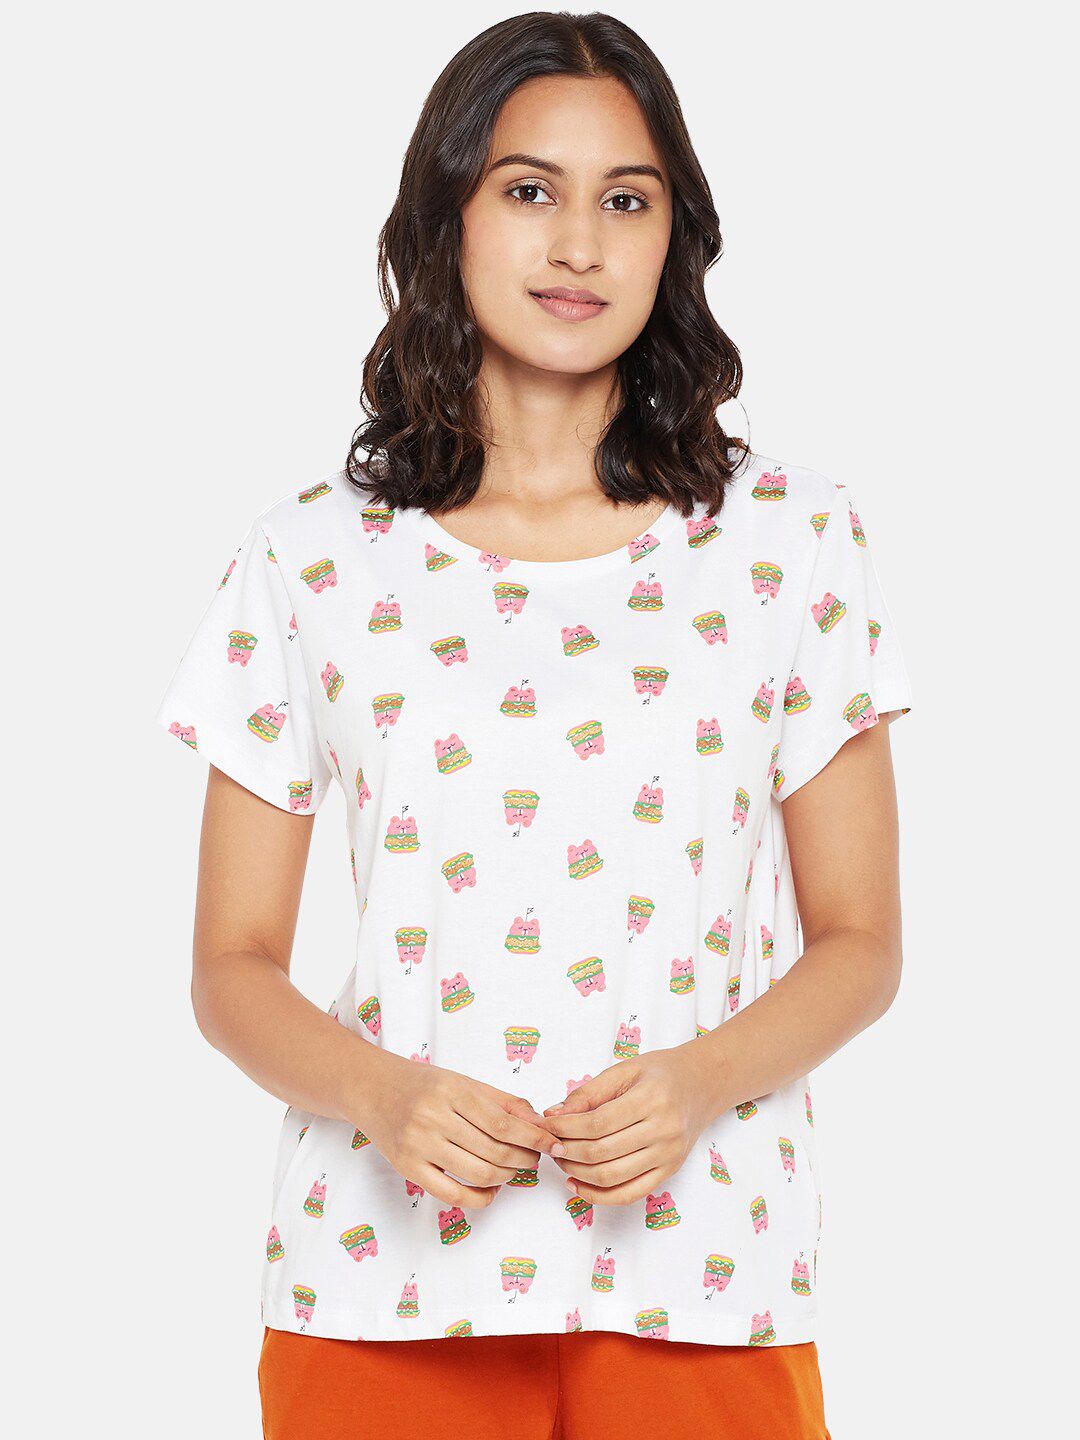 Dreamz by Pantaloons White & Pink Printed Pure Cotton Regular Lounge tshirt Price in India